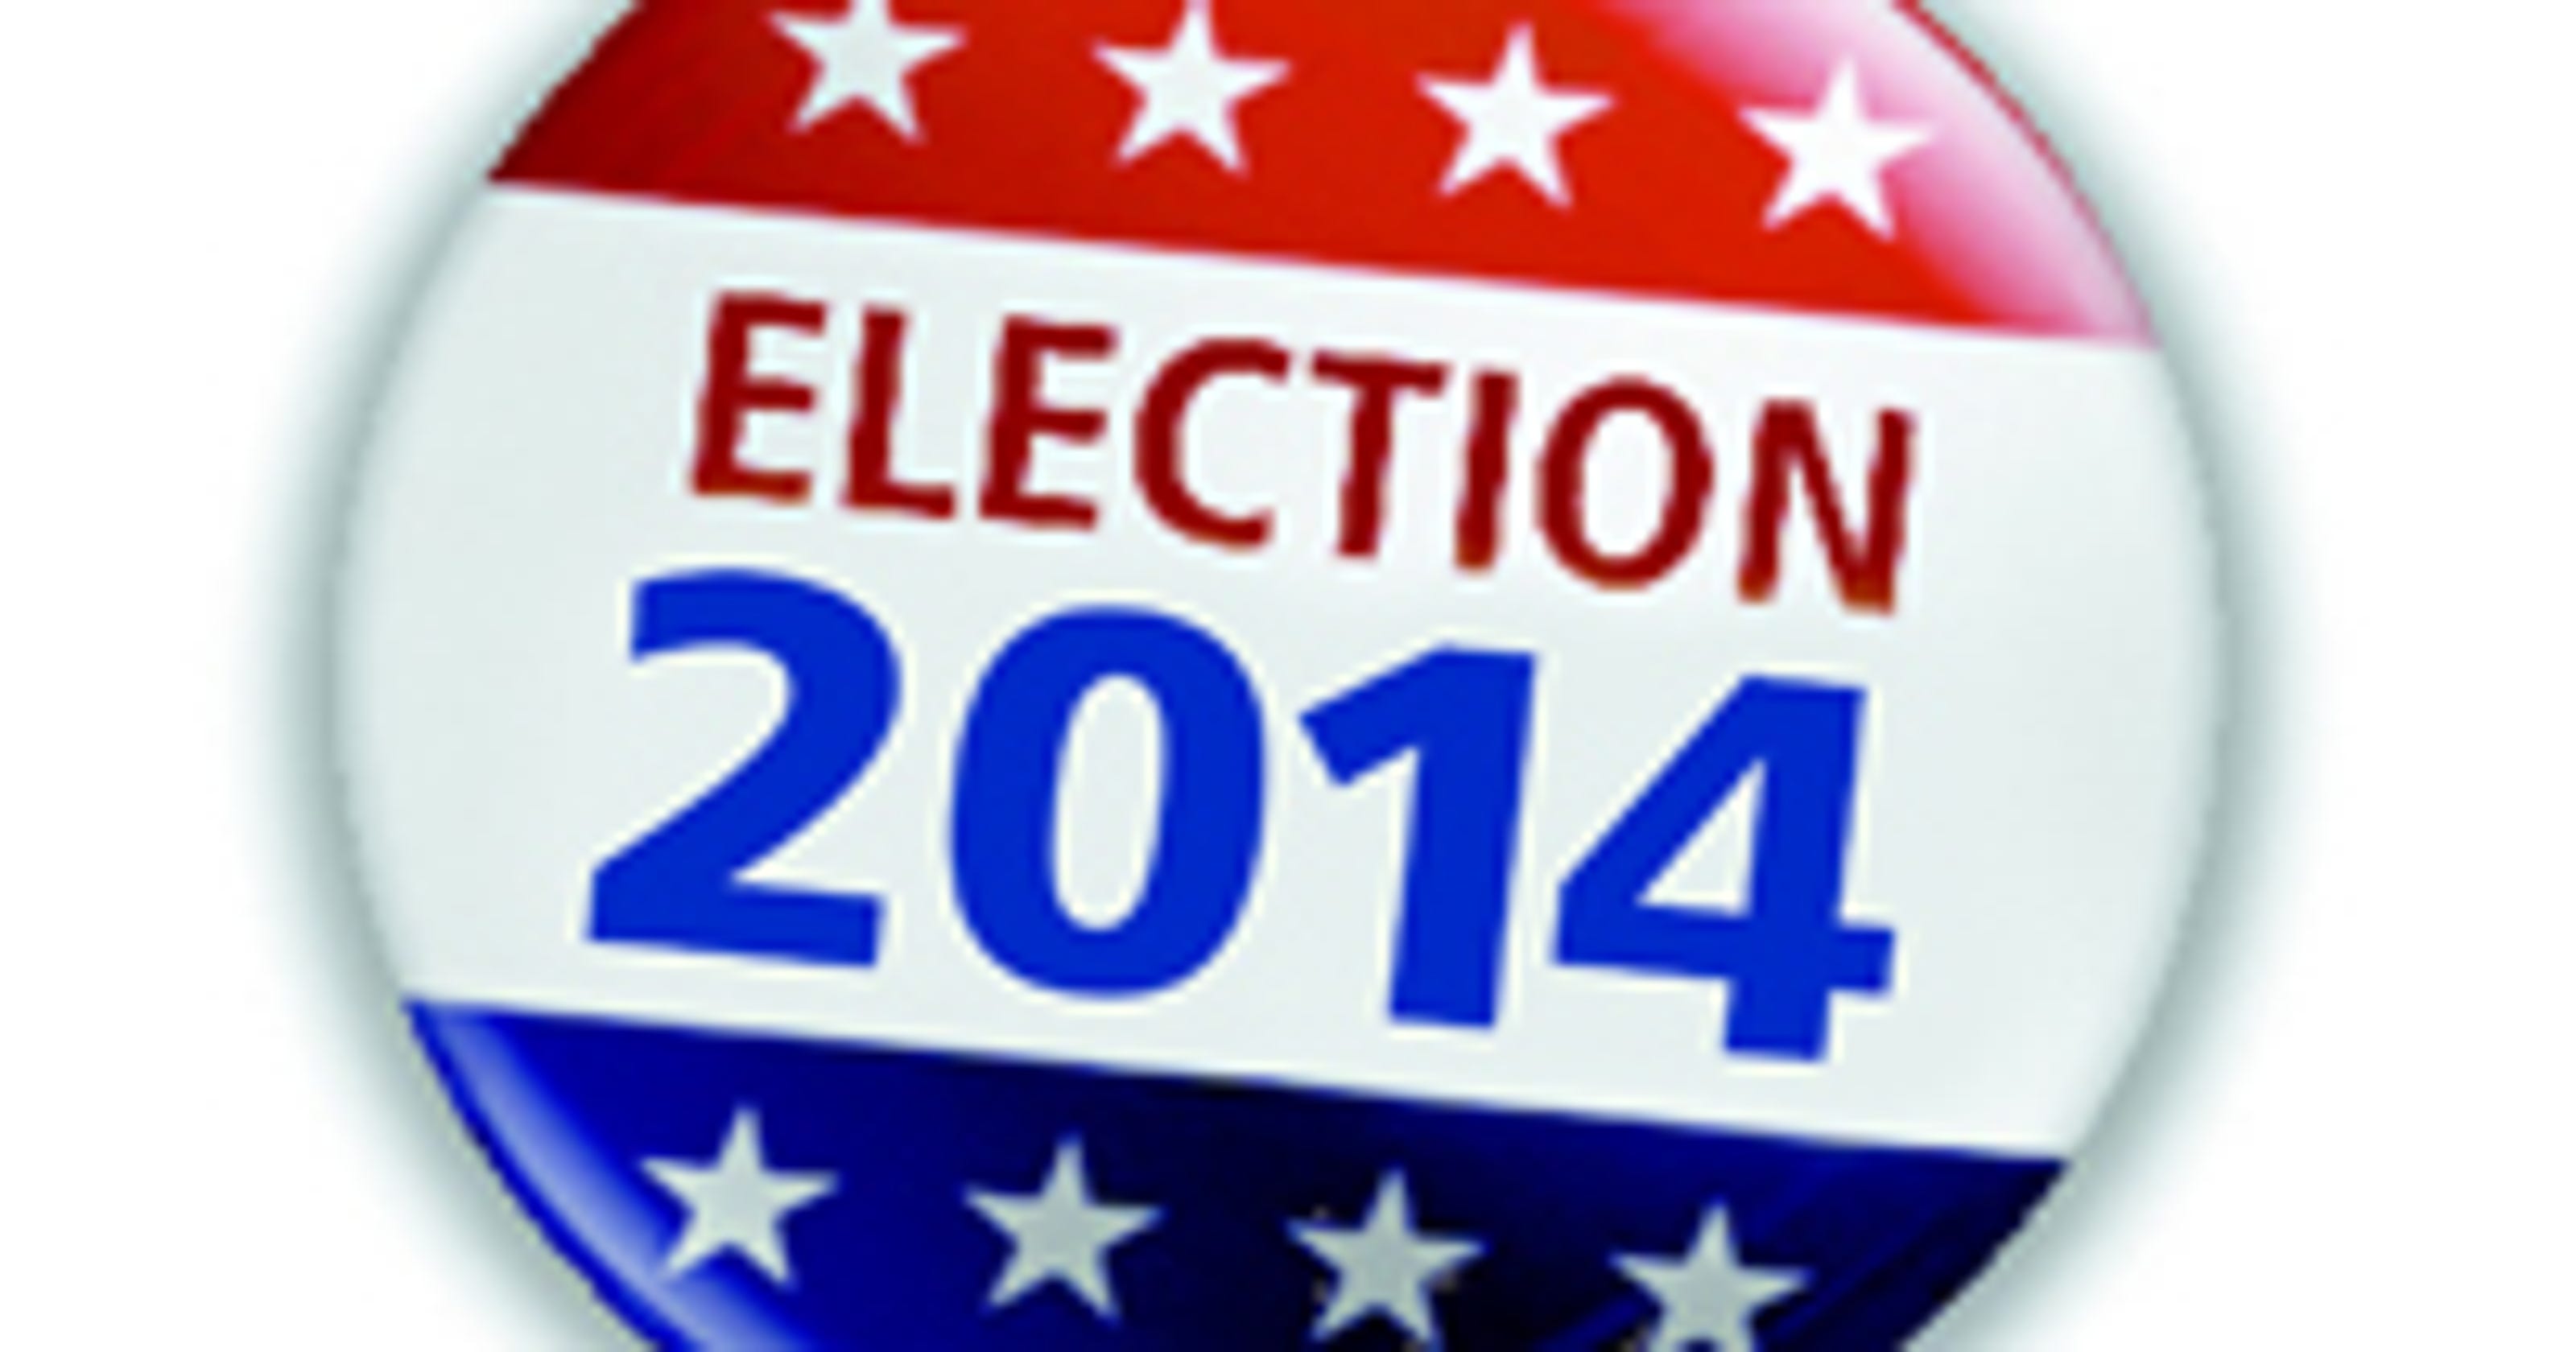 UPDATE 2 Dickson County Election results